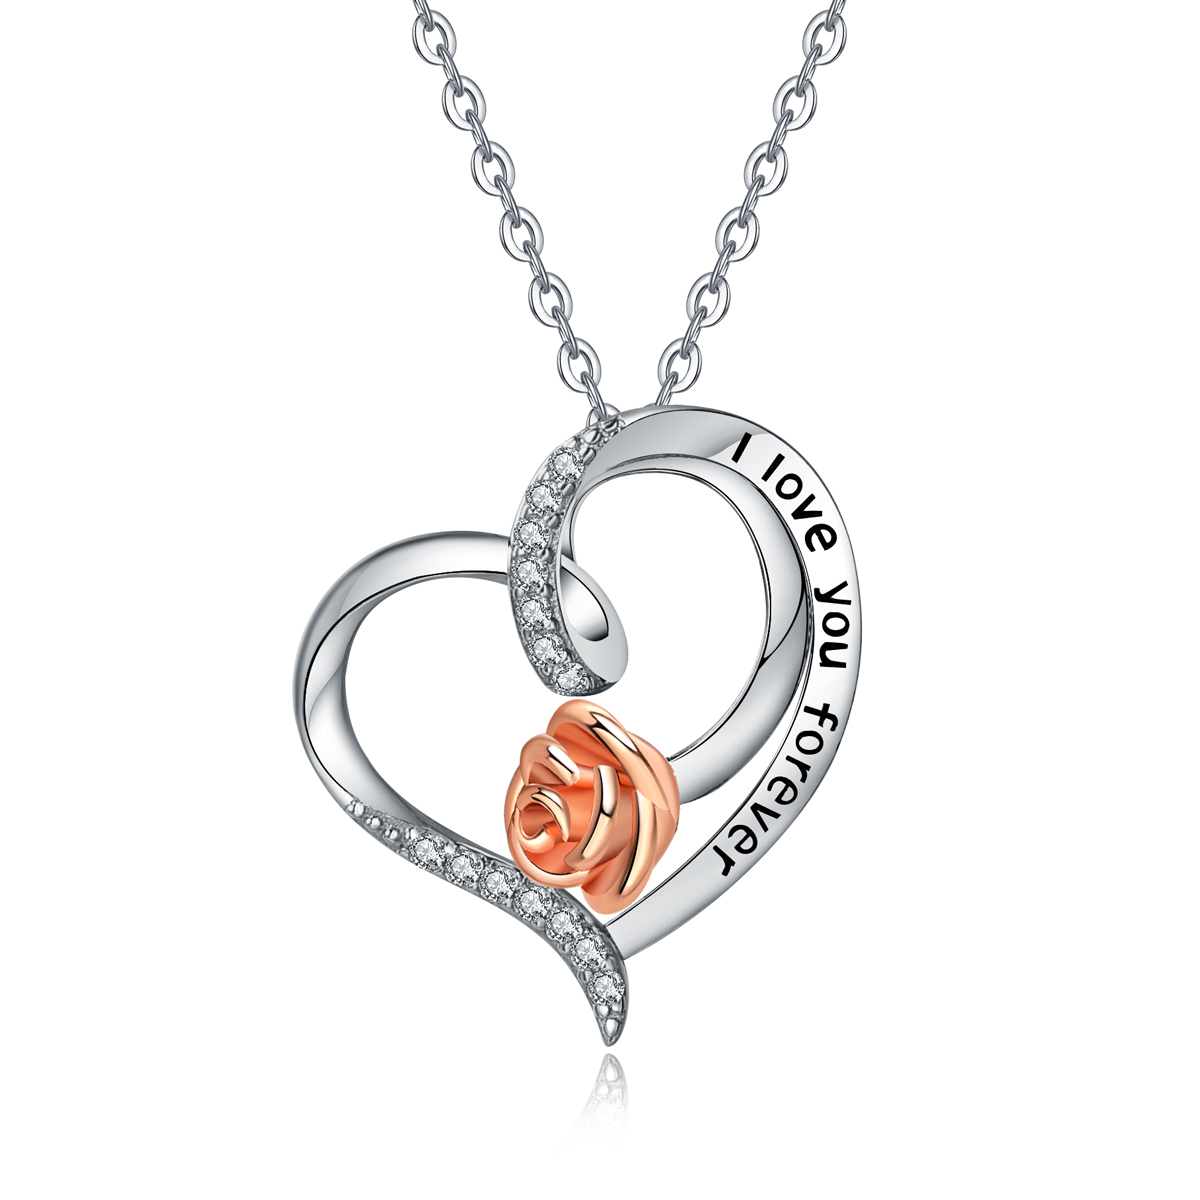 Merryshine Jewelry S925 Sterling Silver Rose Flower and Love Heart Pendant Necklaces